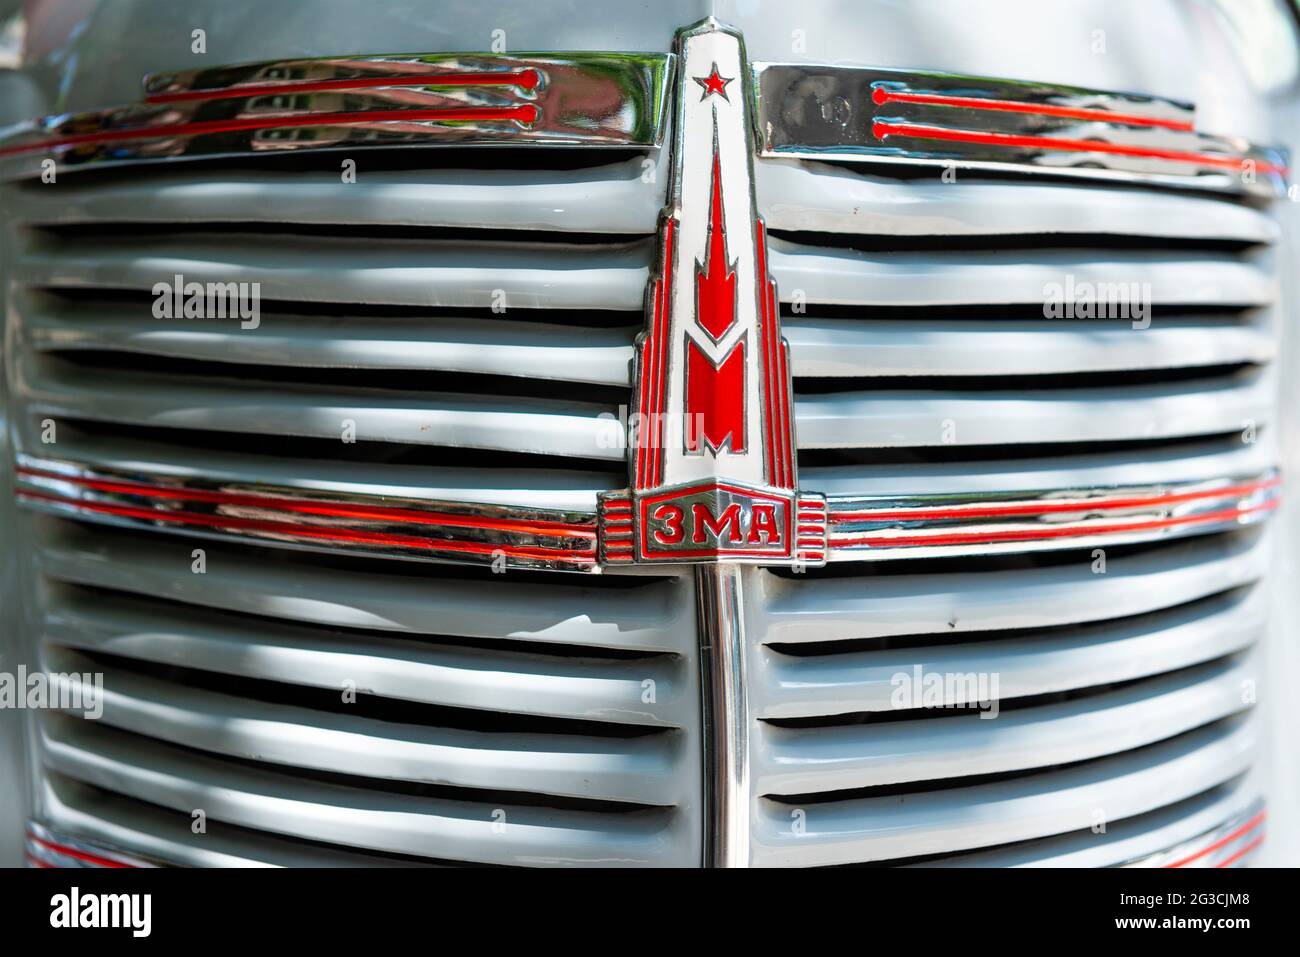 ZMA red emblem and logo on the front radiator of a 1951 MOSKVITCH 400-420 Sedan. Stock Photo